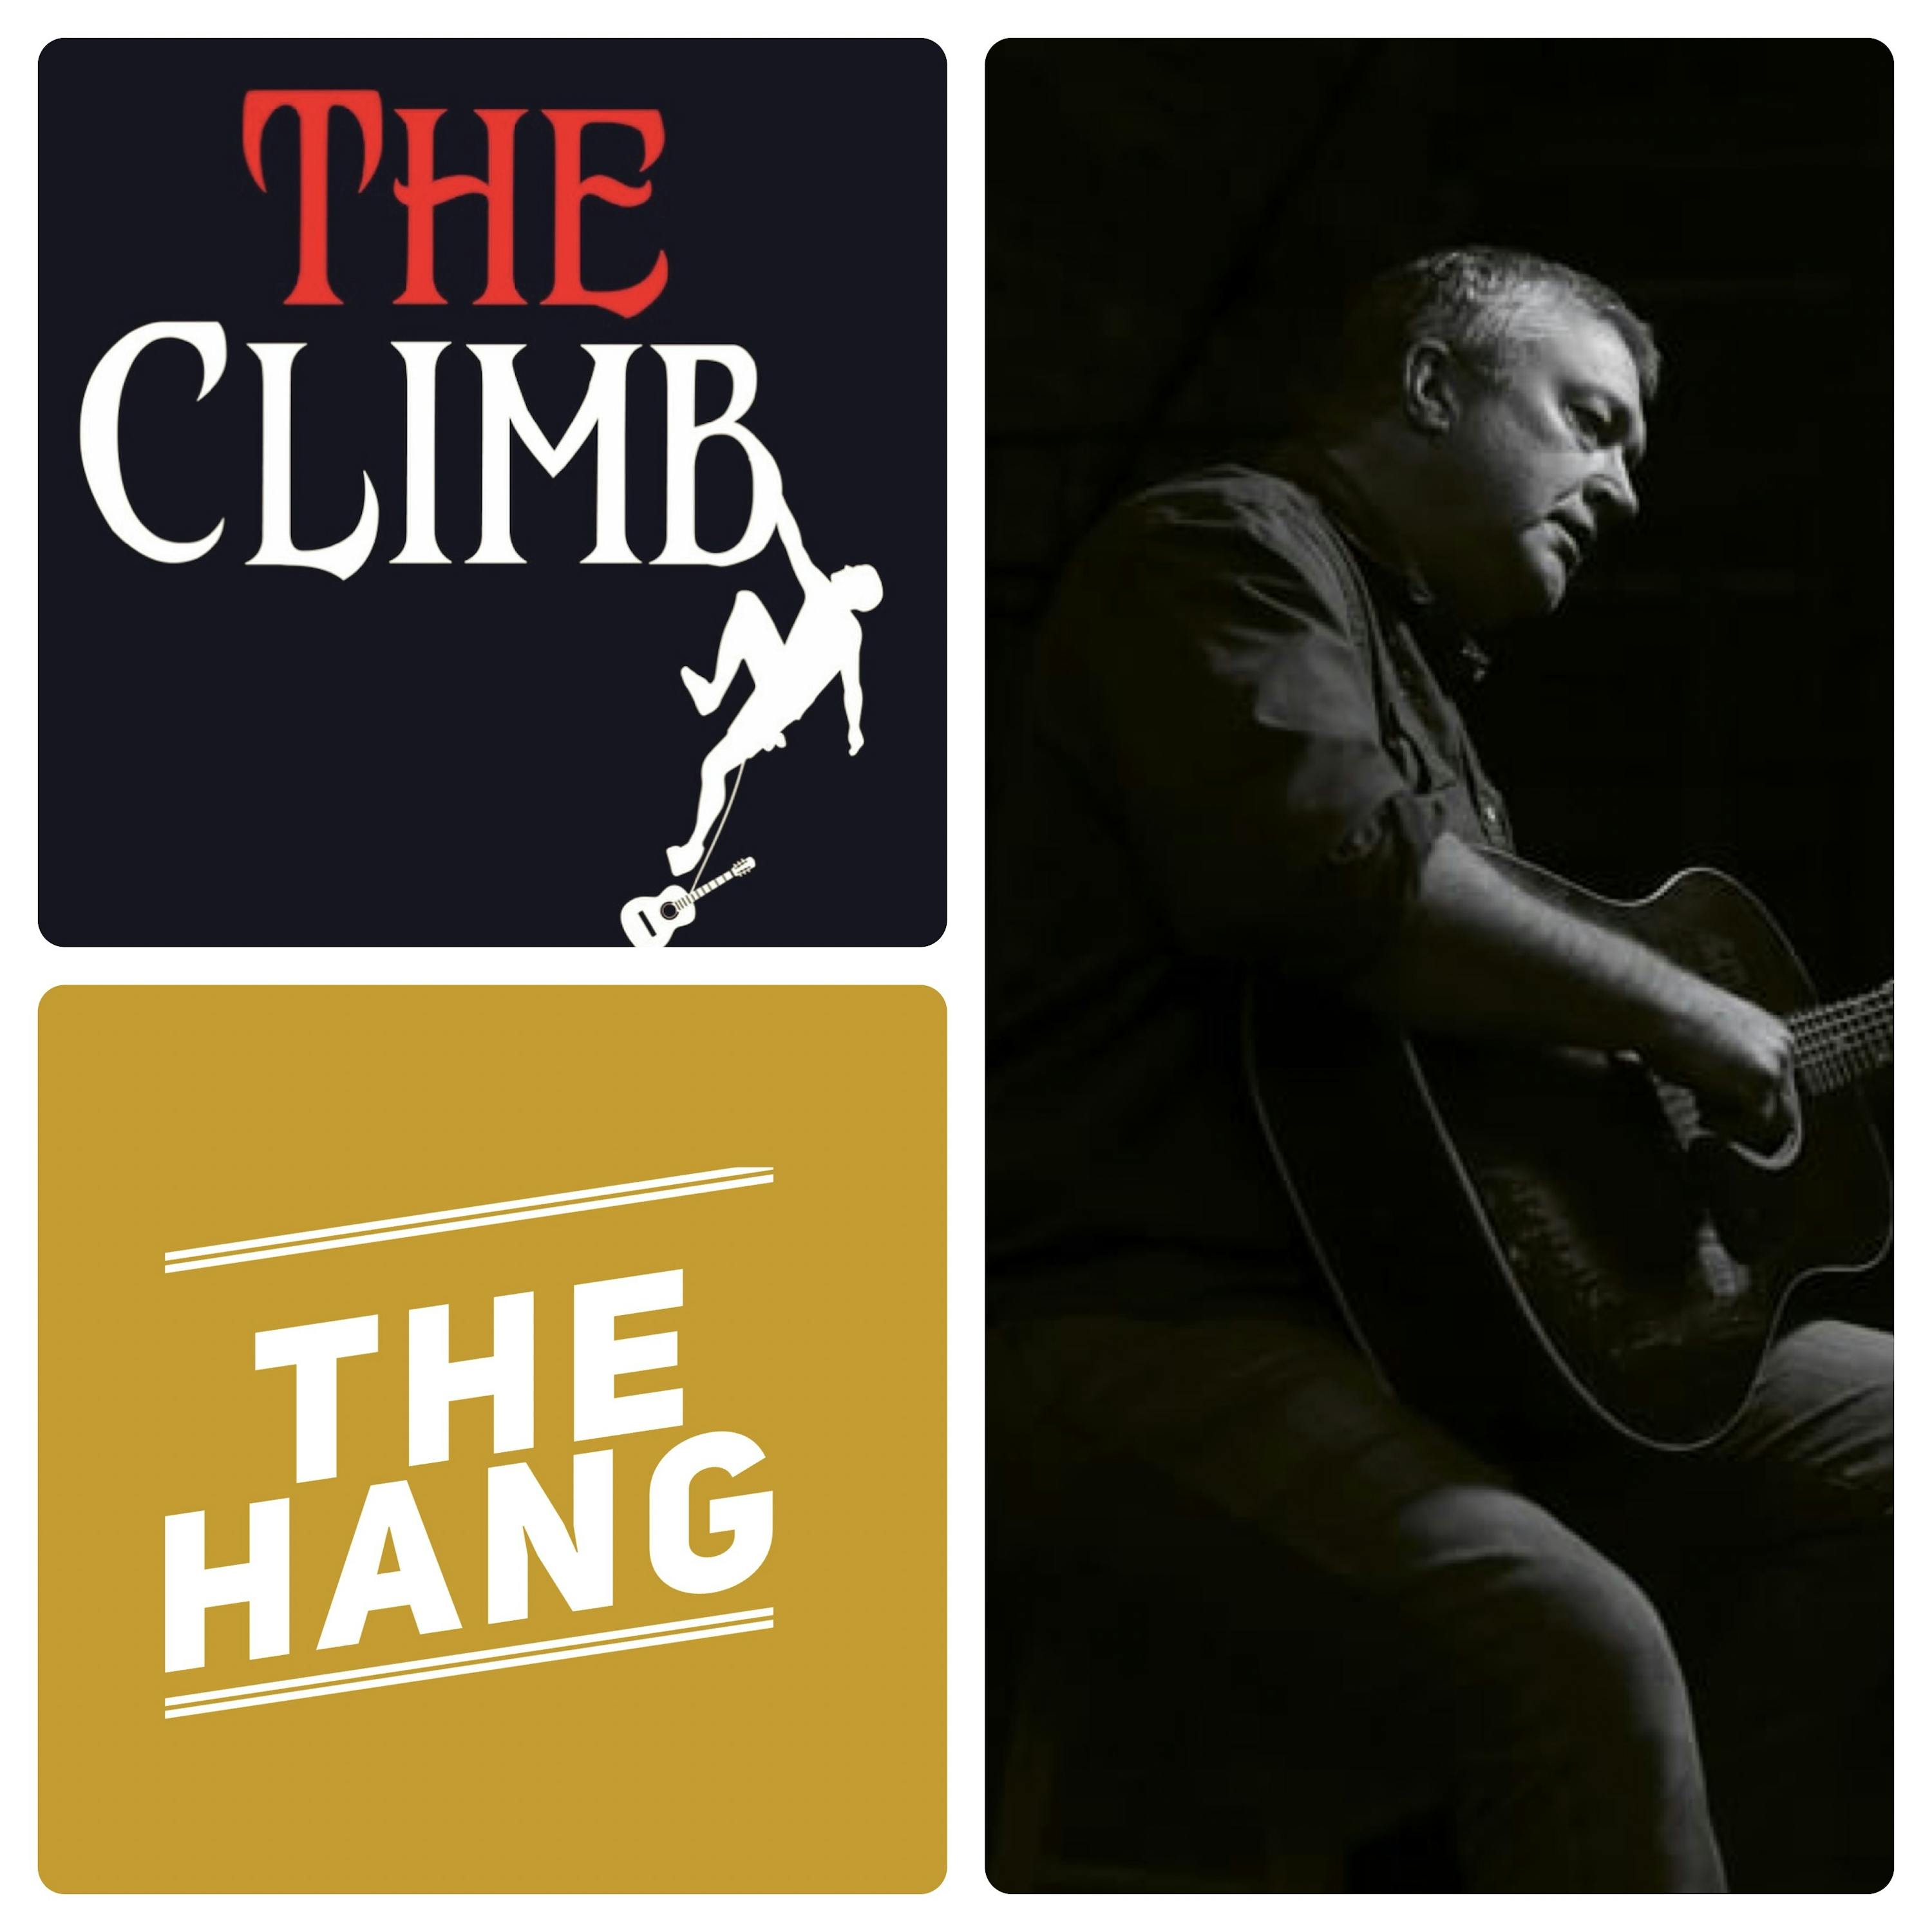 Songwriting Pro’s ”The Hang” with Pro Songwriter, Phillip Lammonds